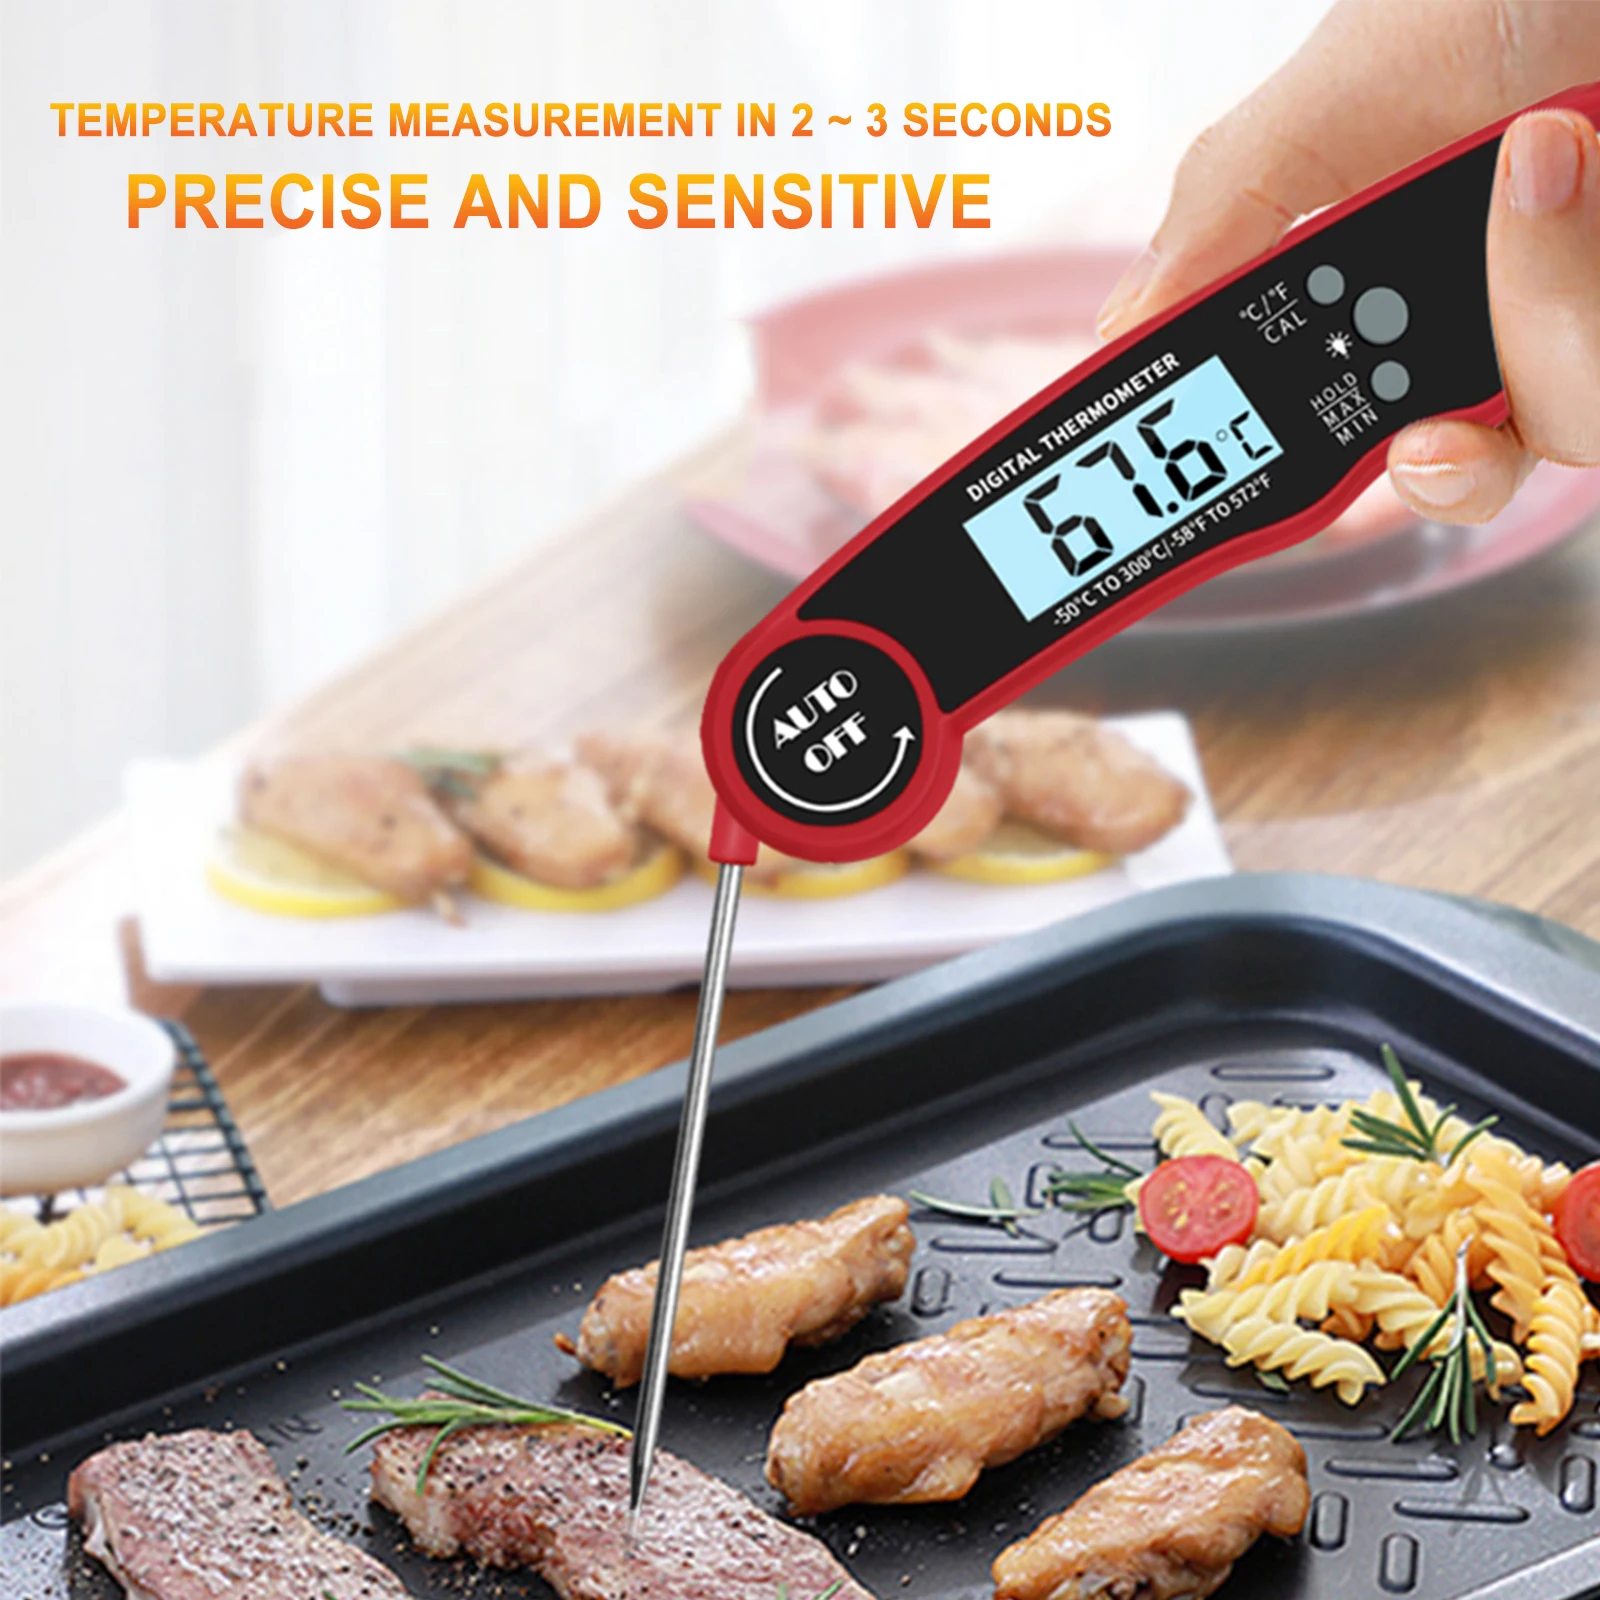 https://ae01.alicdn.com/kf/Sbdf4adb6c7ad4fbf85eb0bb11e9d850ar/Digital-Kitchen-Thermometer-Barbecue-BBQ-Food-Thermometer-Water-Cooking-Grill-Meat-Thermometers-Dinning-Household-Gauge.jpg